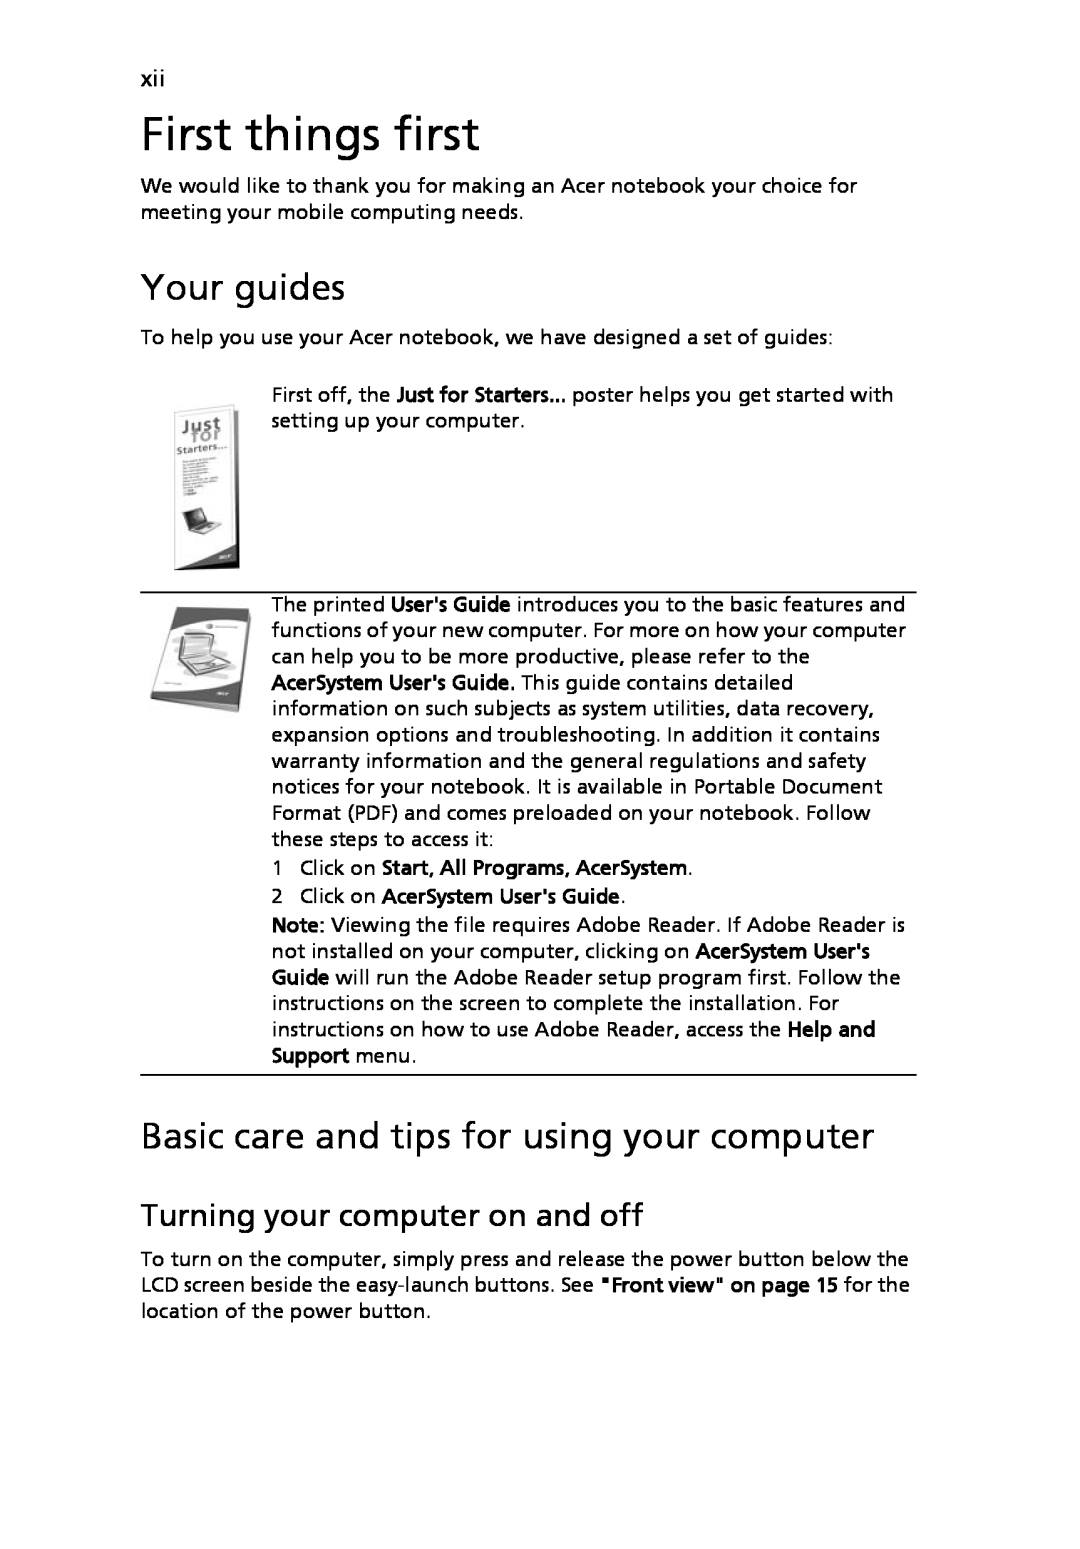 Acer 3030 Series, 3040 Series manual First things first, Your guides, Basic care and tips for using your computer 